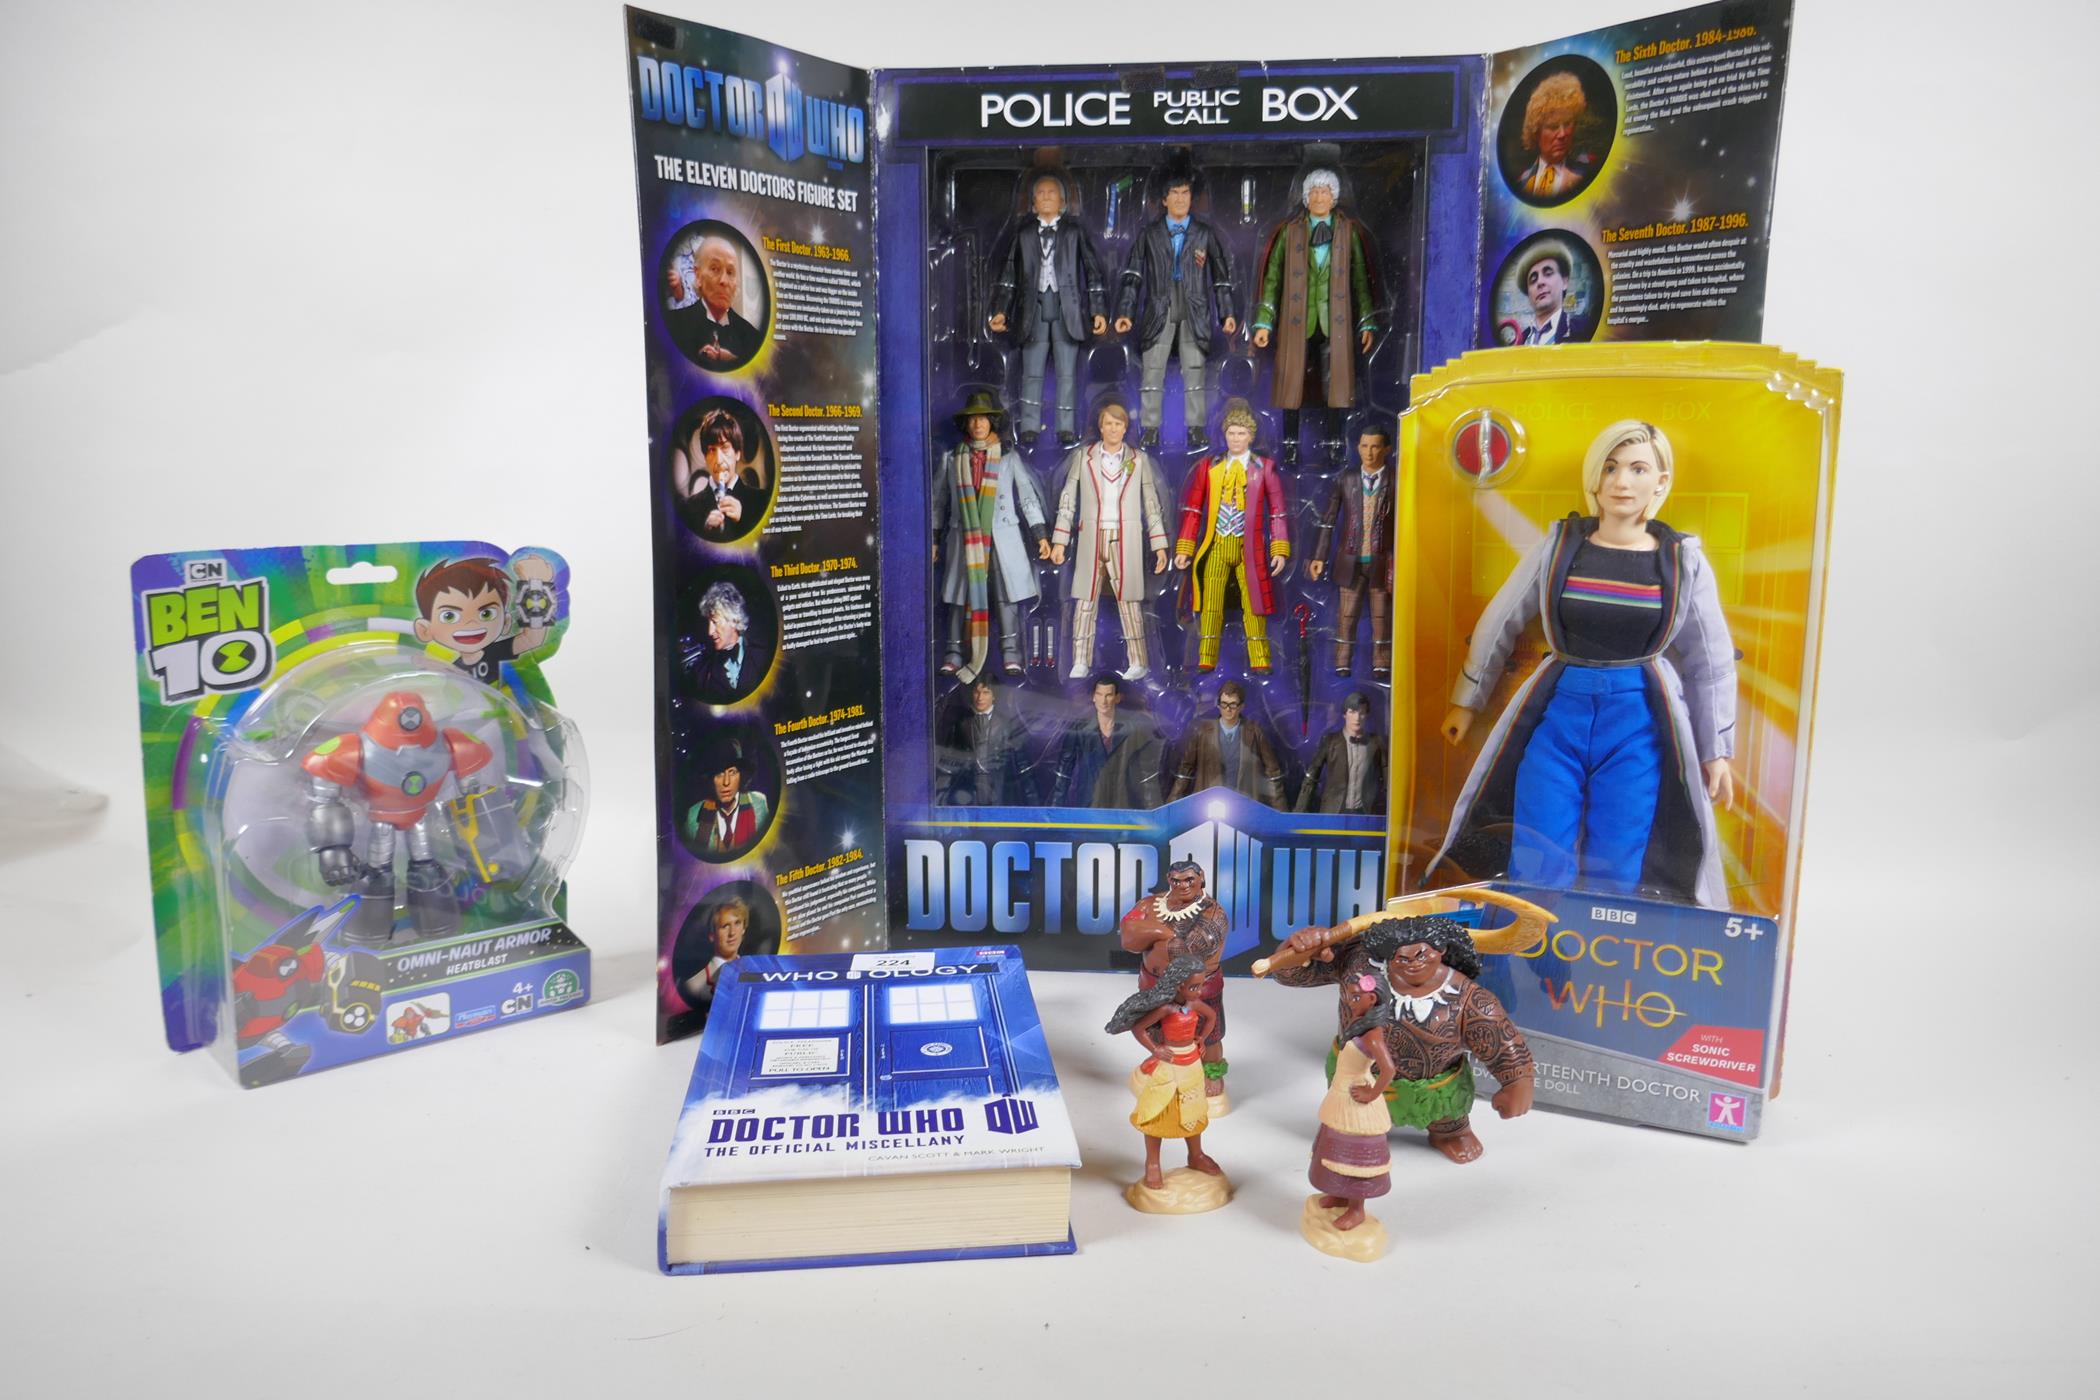 Dr Who Eleven Doctors figure set, Who-ology book, 13th Doctor adventure doll, Ben 10 omni-naut-